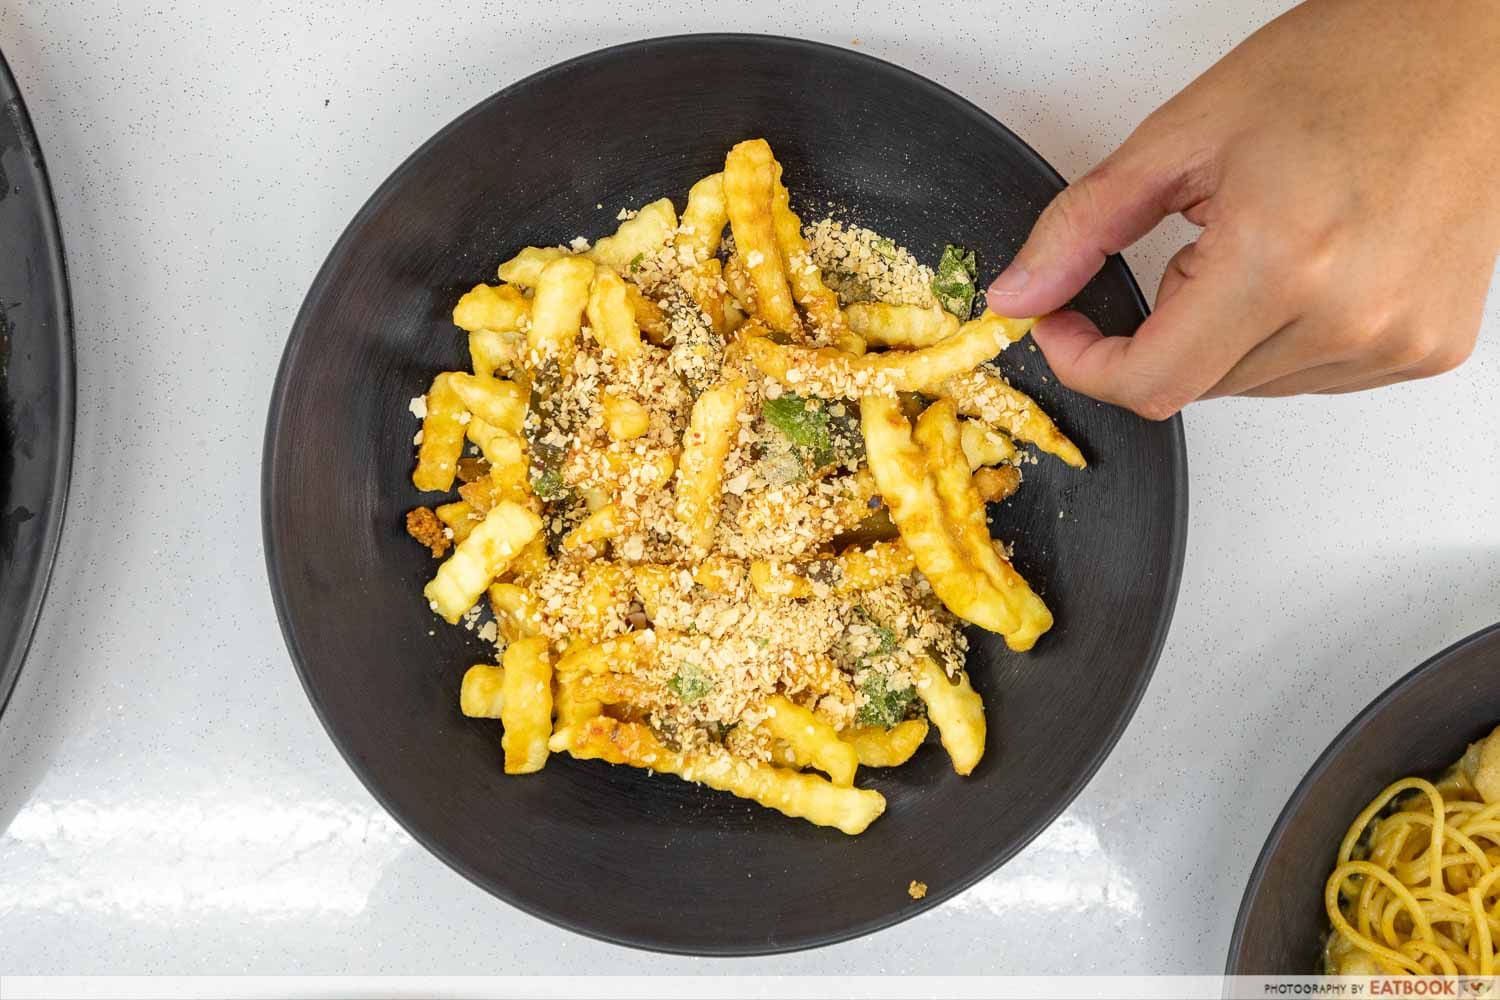 Cheesy Salted Egg Yolk Cereal Fries